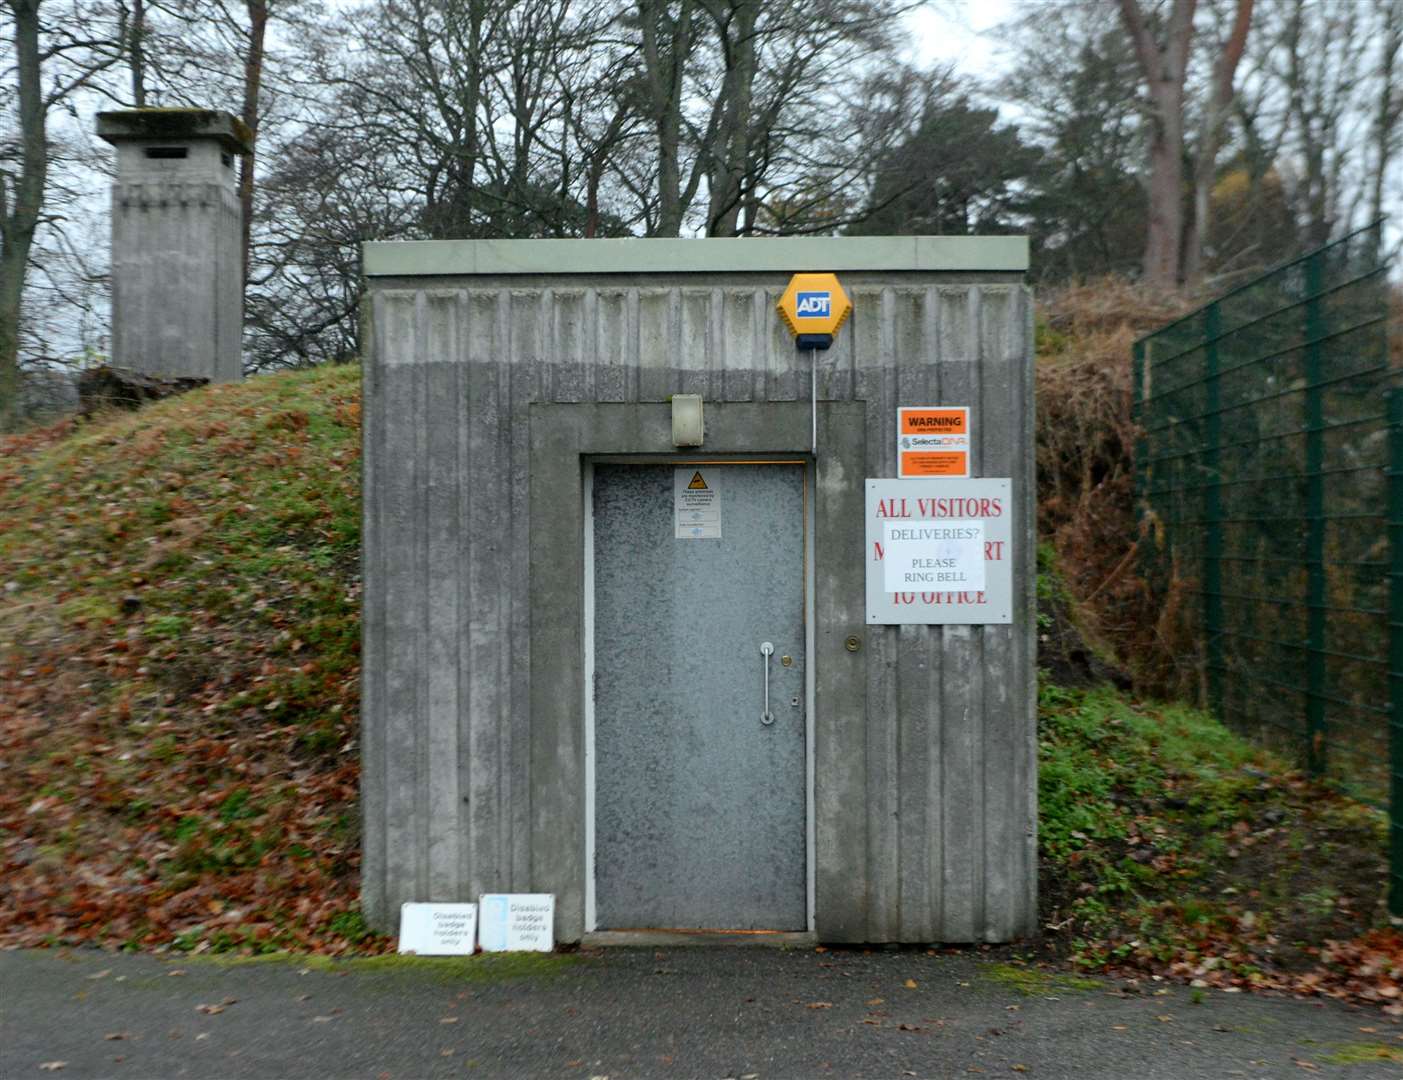 The entrance to the bunker.